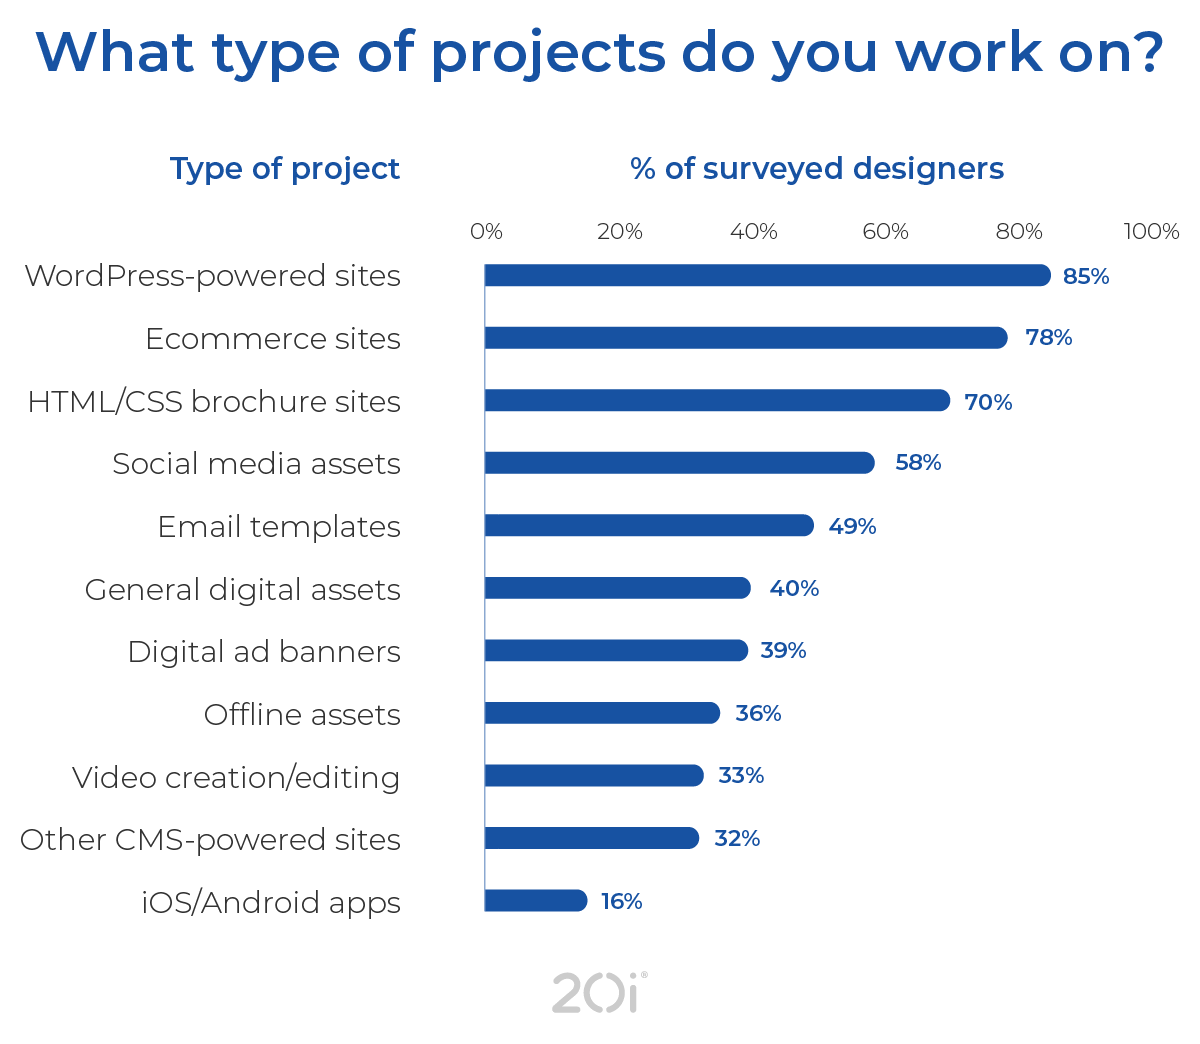 Survey results on what types of projects they work on. 